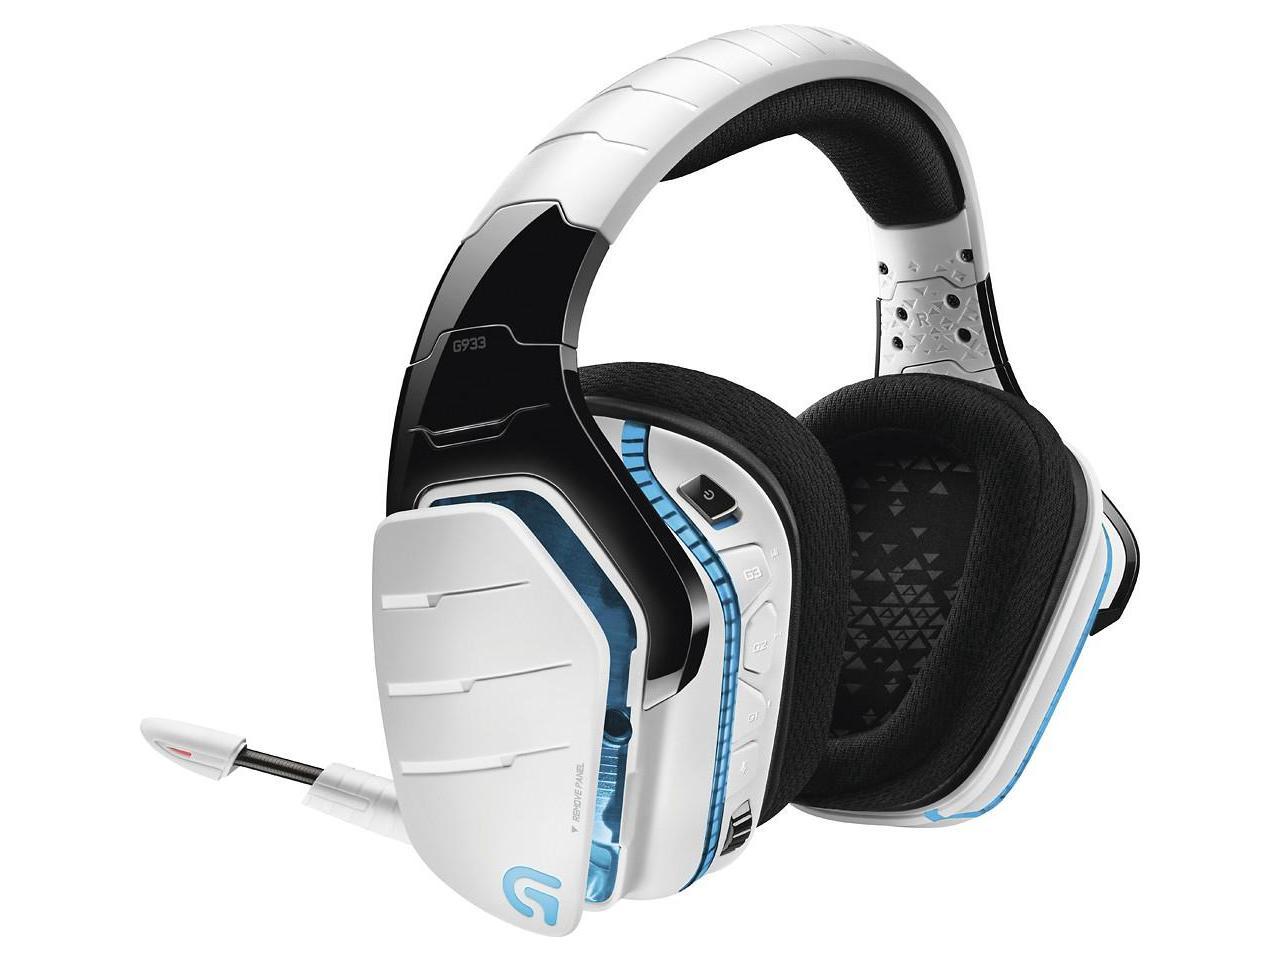 Logitech G933 Artemis Spectrum Wireless RGB 7.1 Dolby and DST Headphone Surround Sound Gaming Headset - White